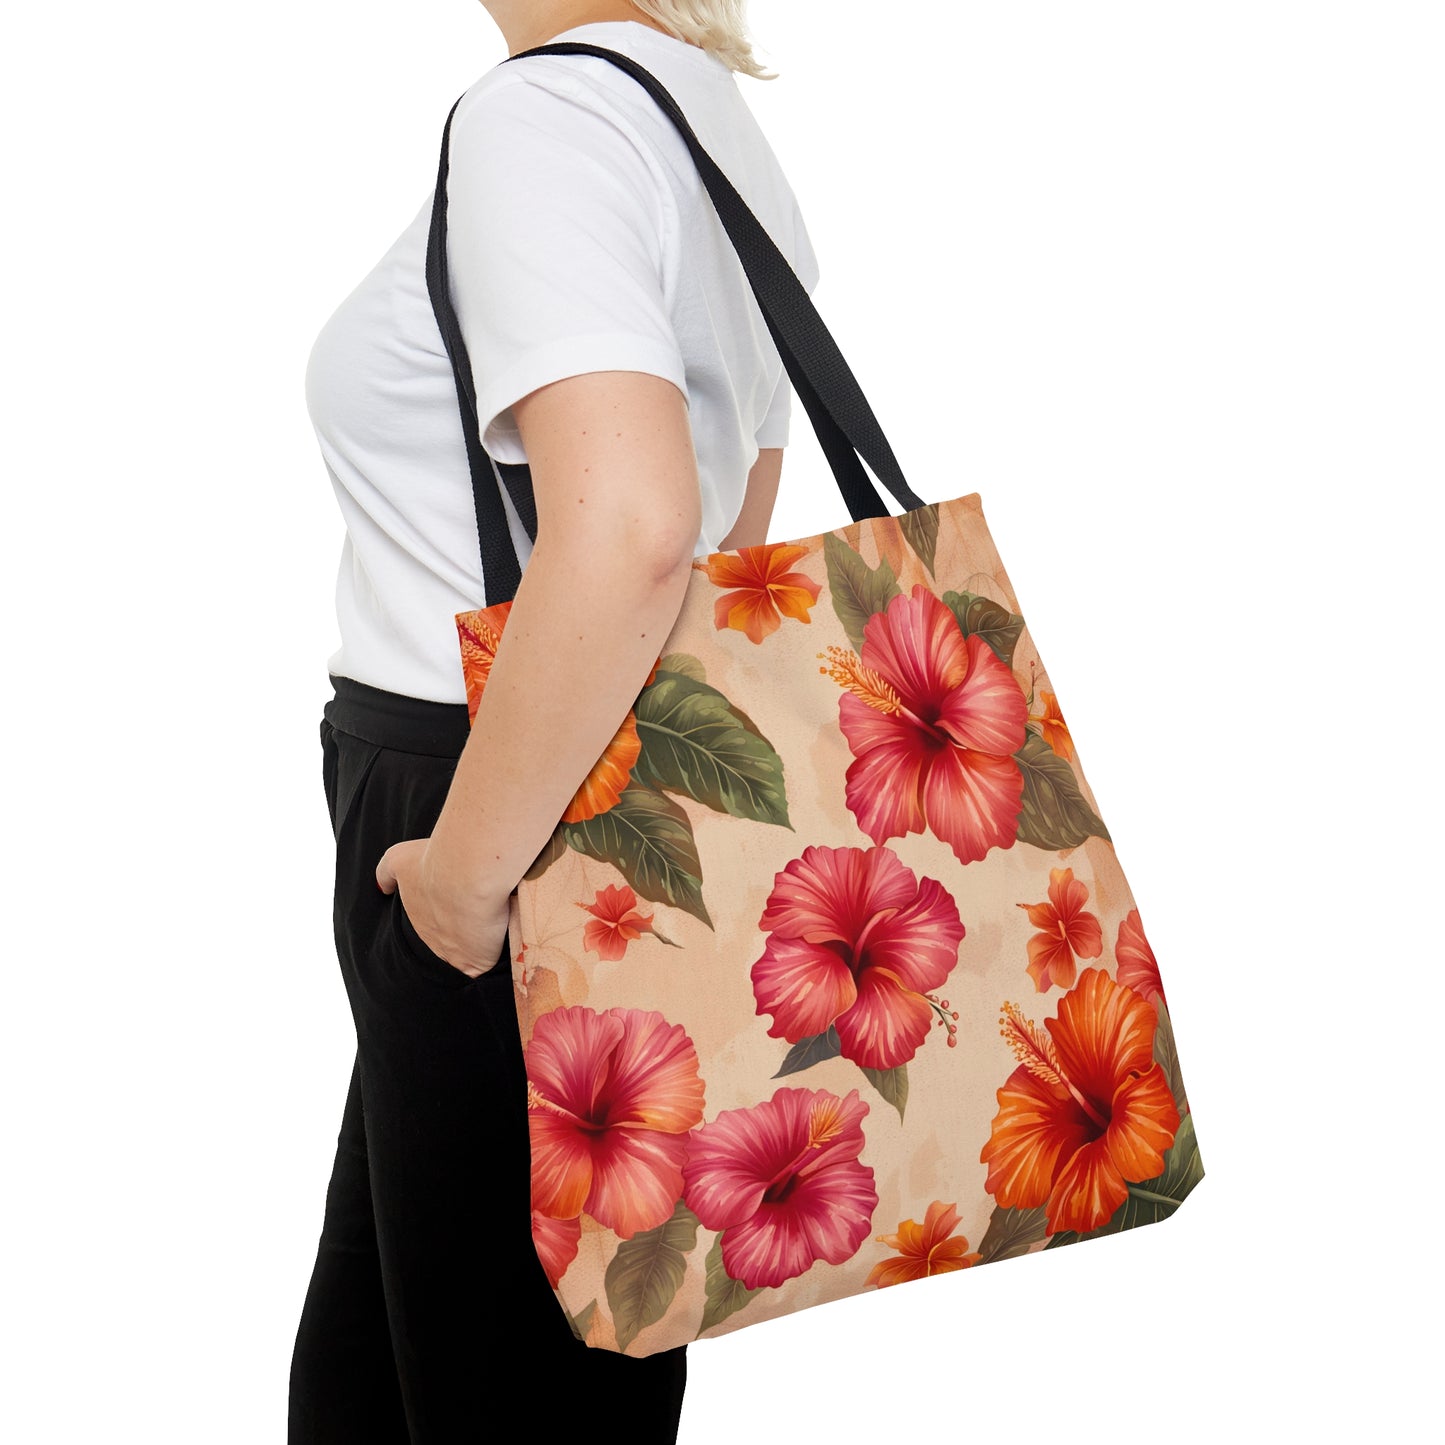 Flower Themed Bags and Travel Accessories - Pink and Orange Hibiscus Flowers Printed on Tote Bag